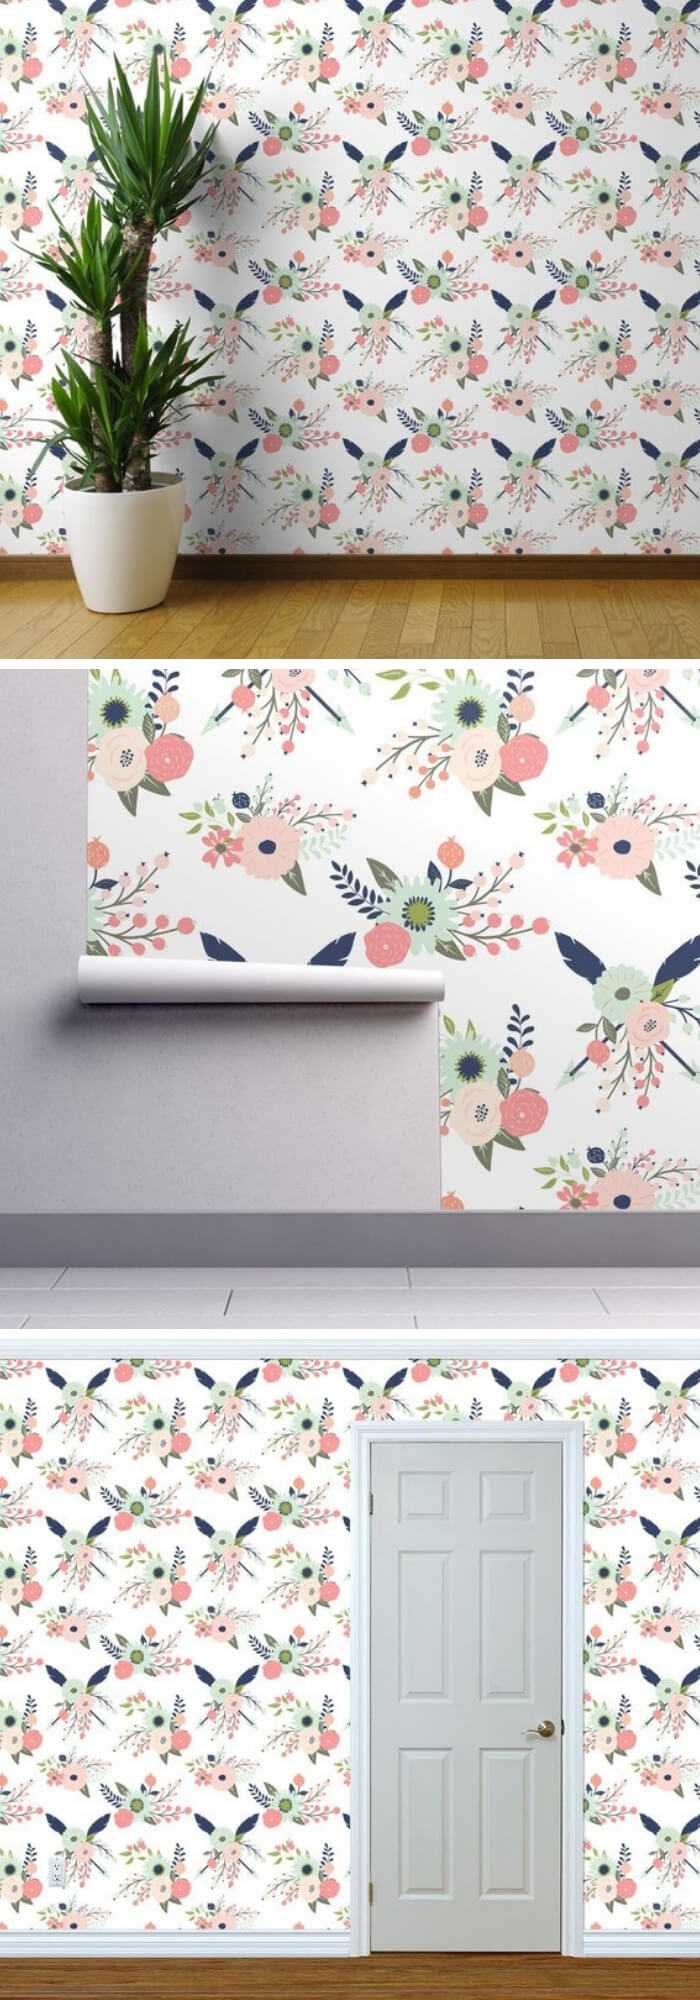 Home Decorating Ideas With Flowers: Floral Wallpaper - Gracie Blooms